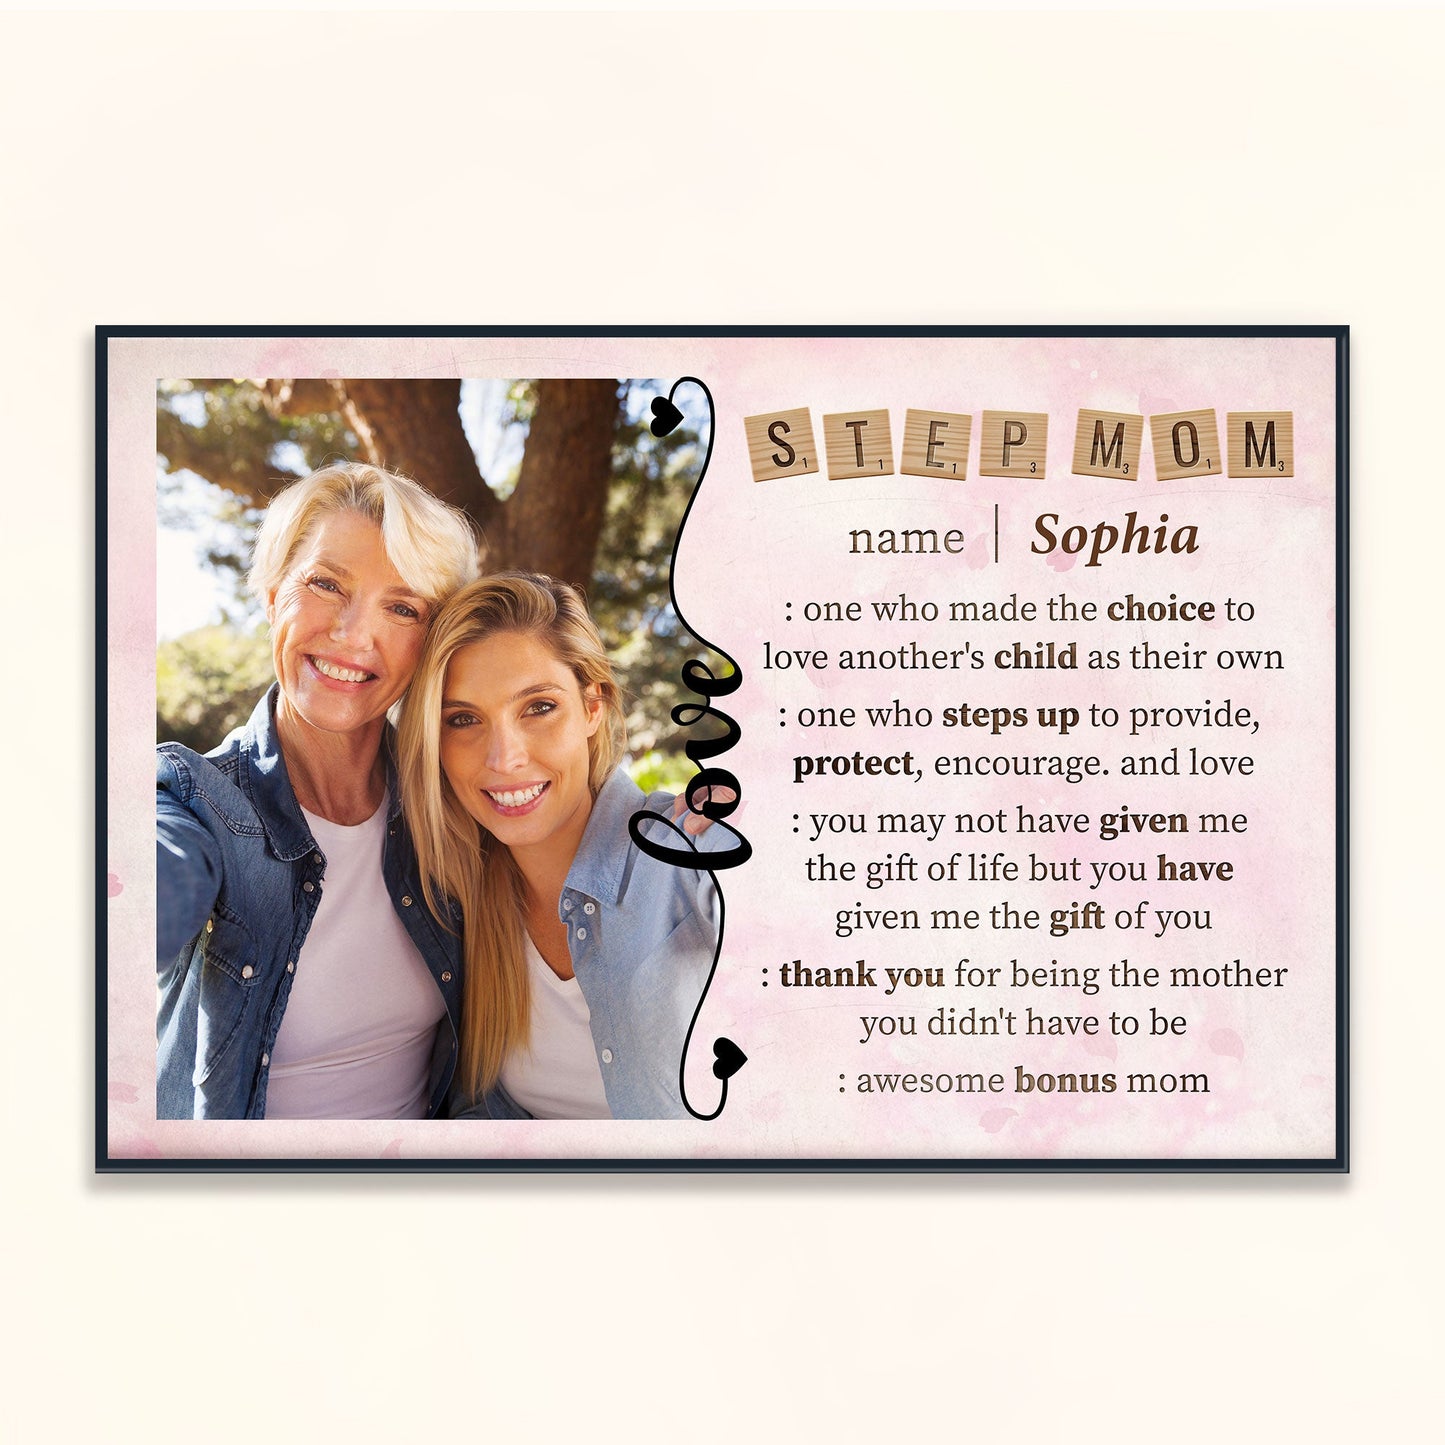 Best Bonus Mom Gifts - Stepmom Gifts - Gifts For Step